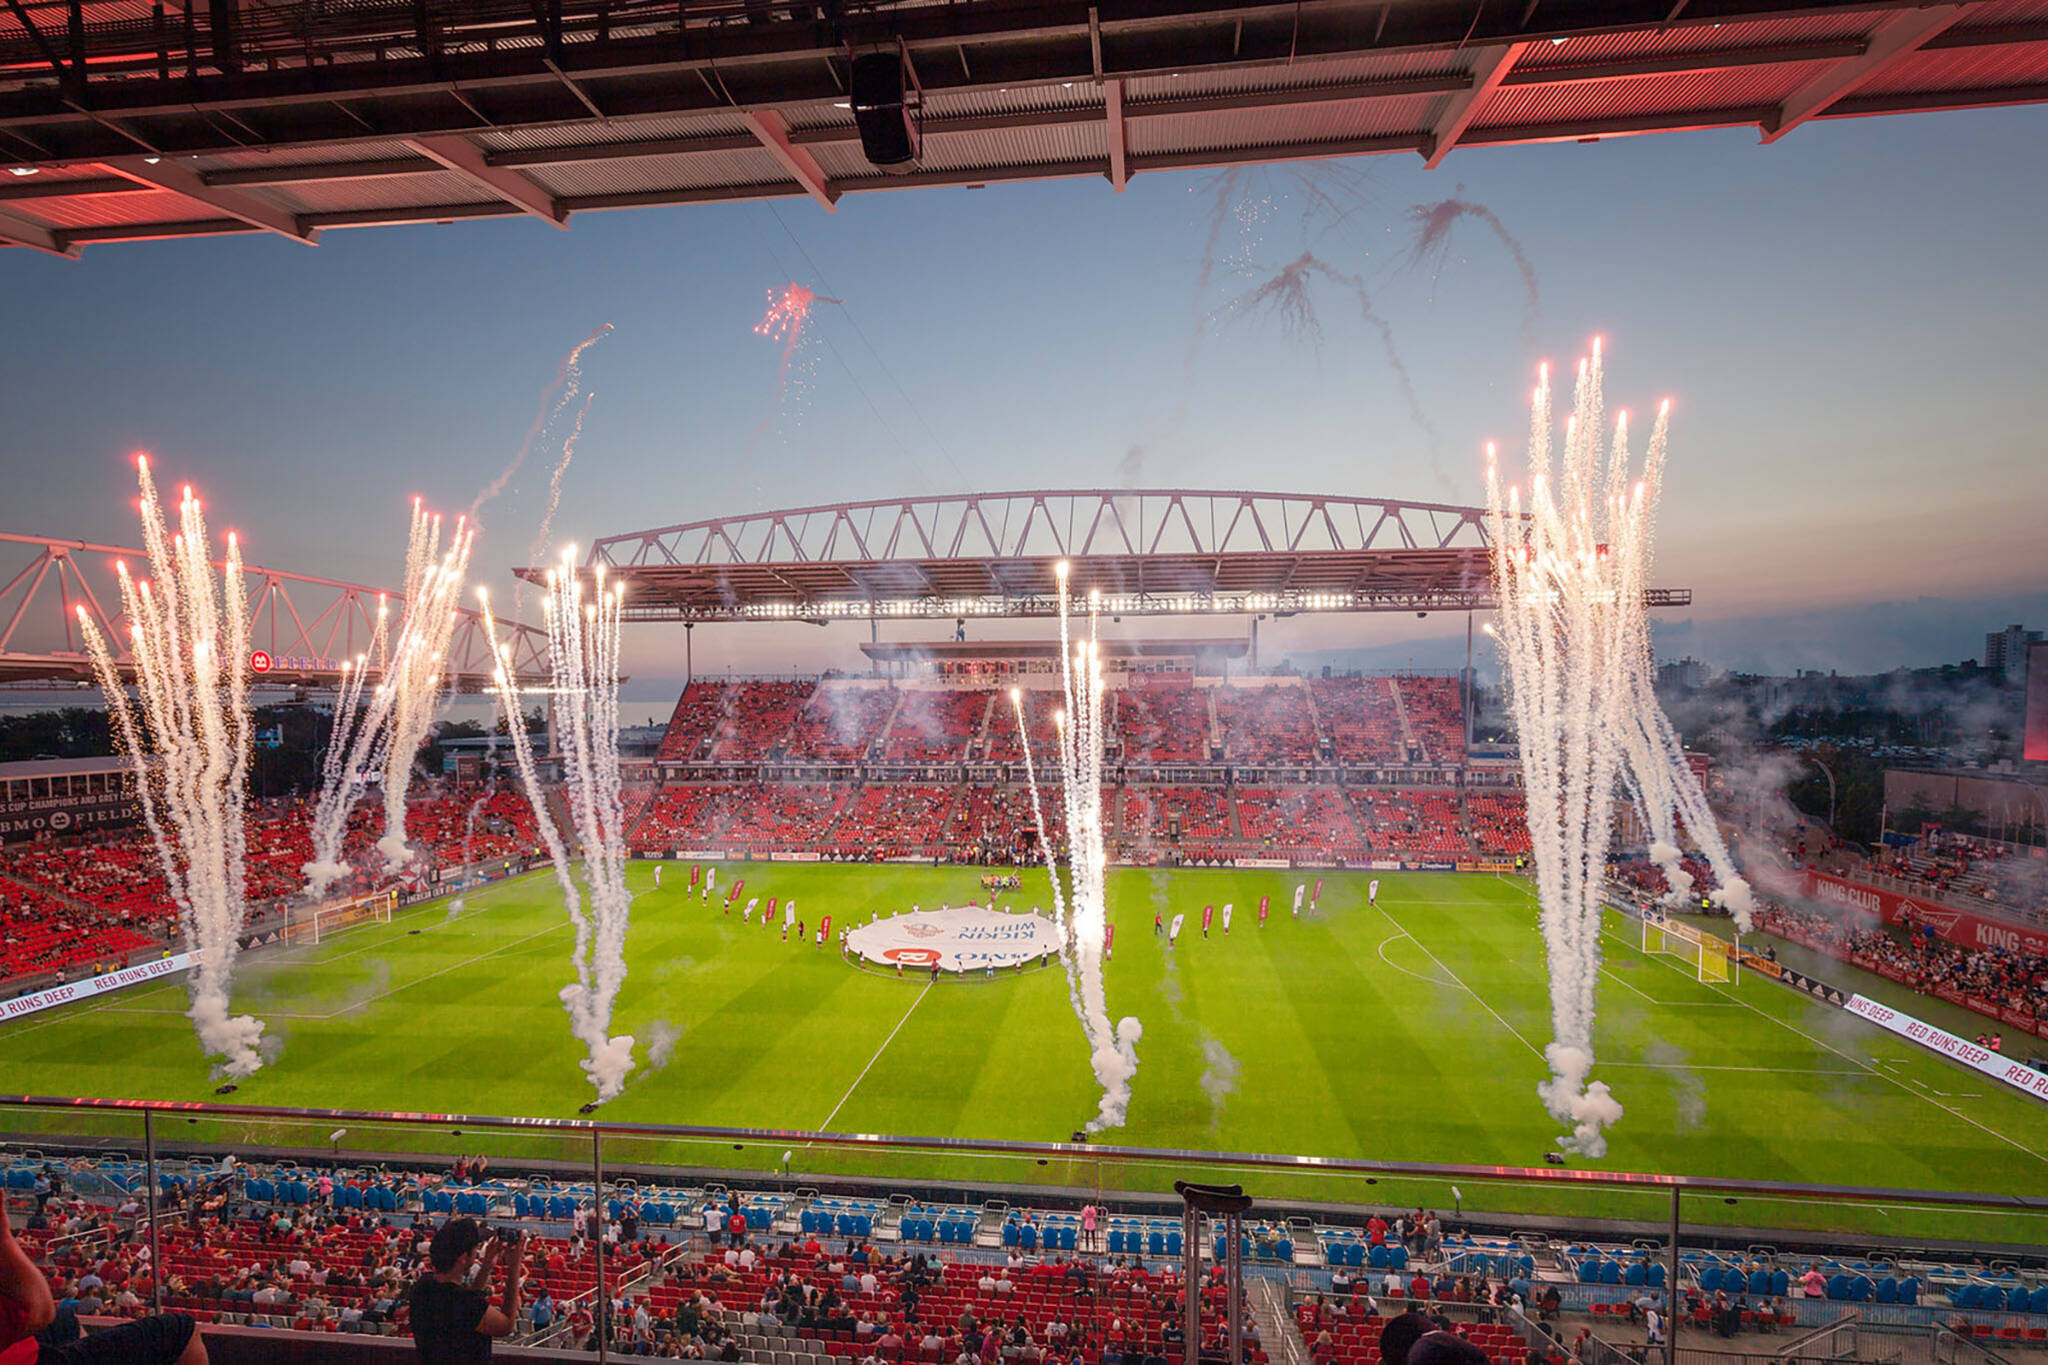 Toronto could be getting a massive FIFA-ready soccer stadium